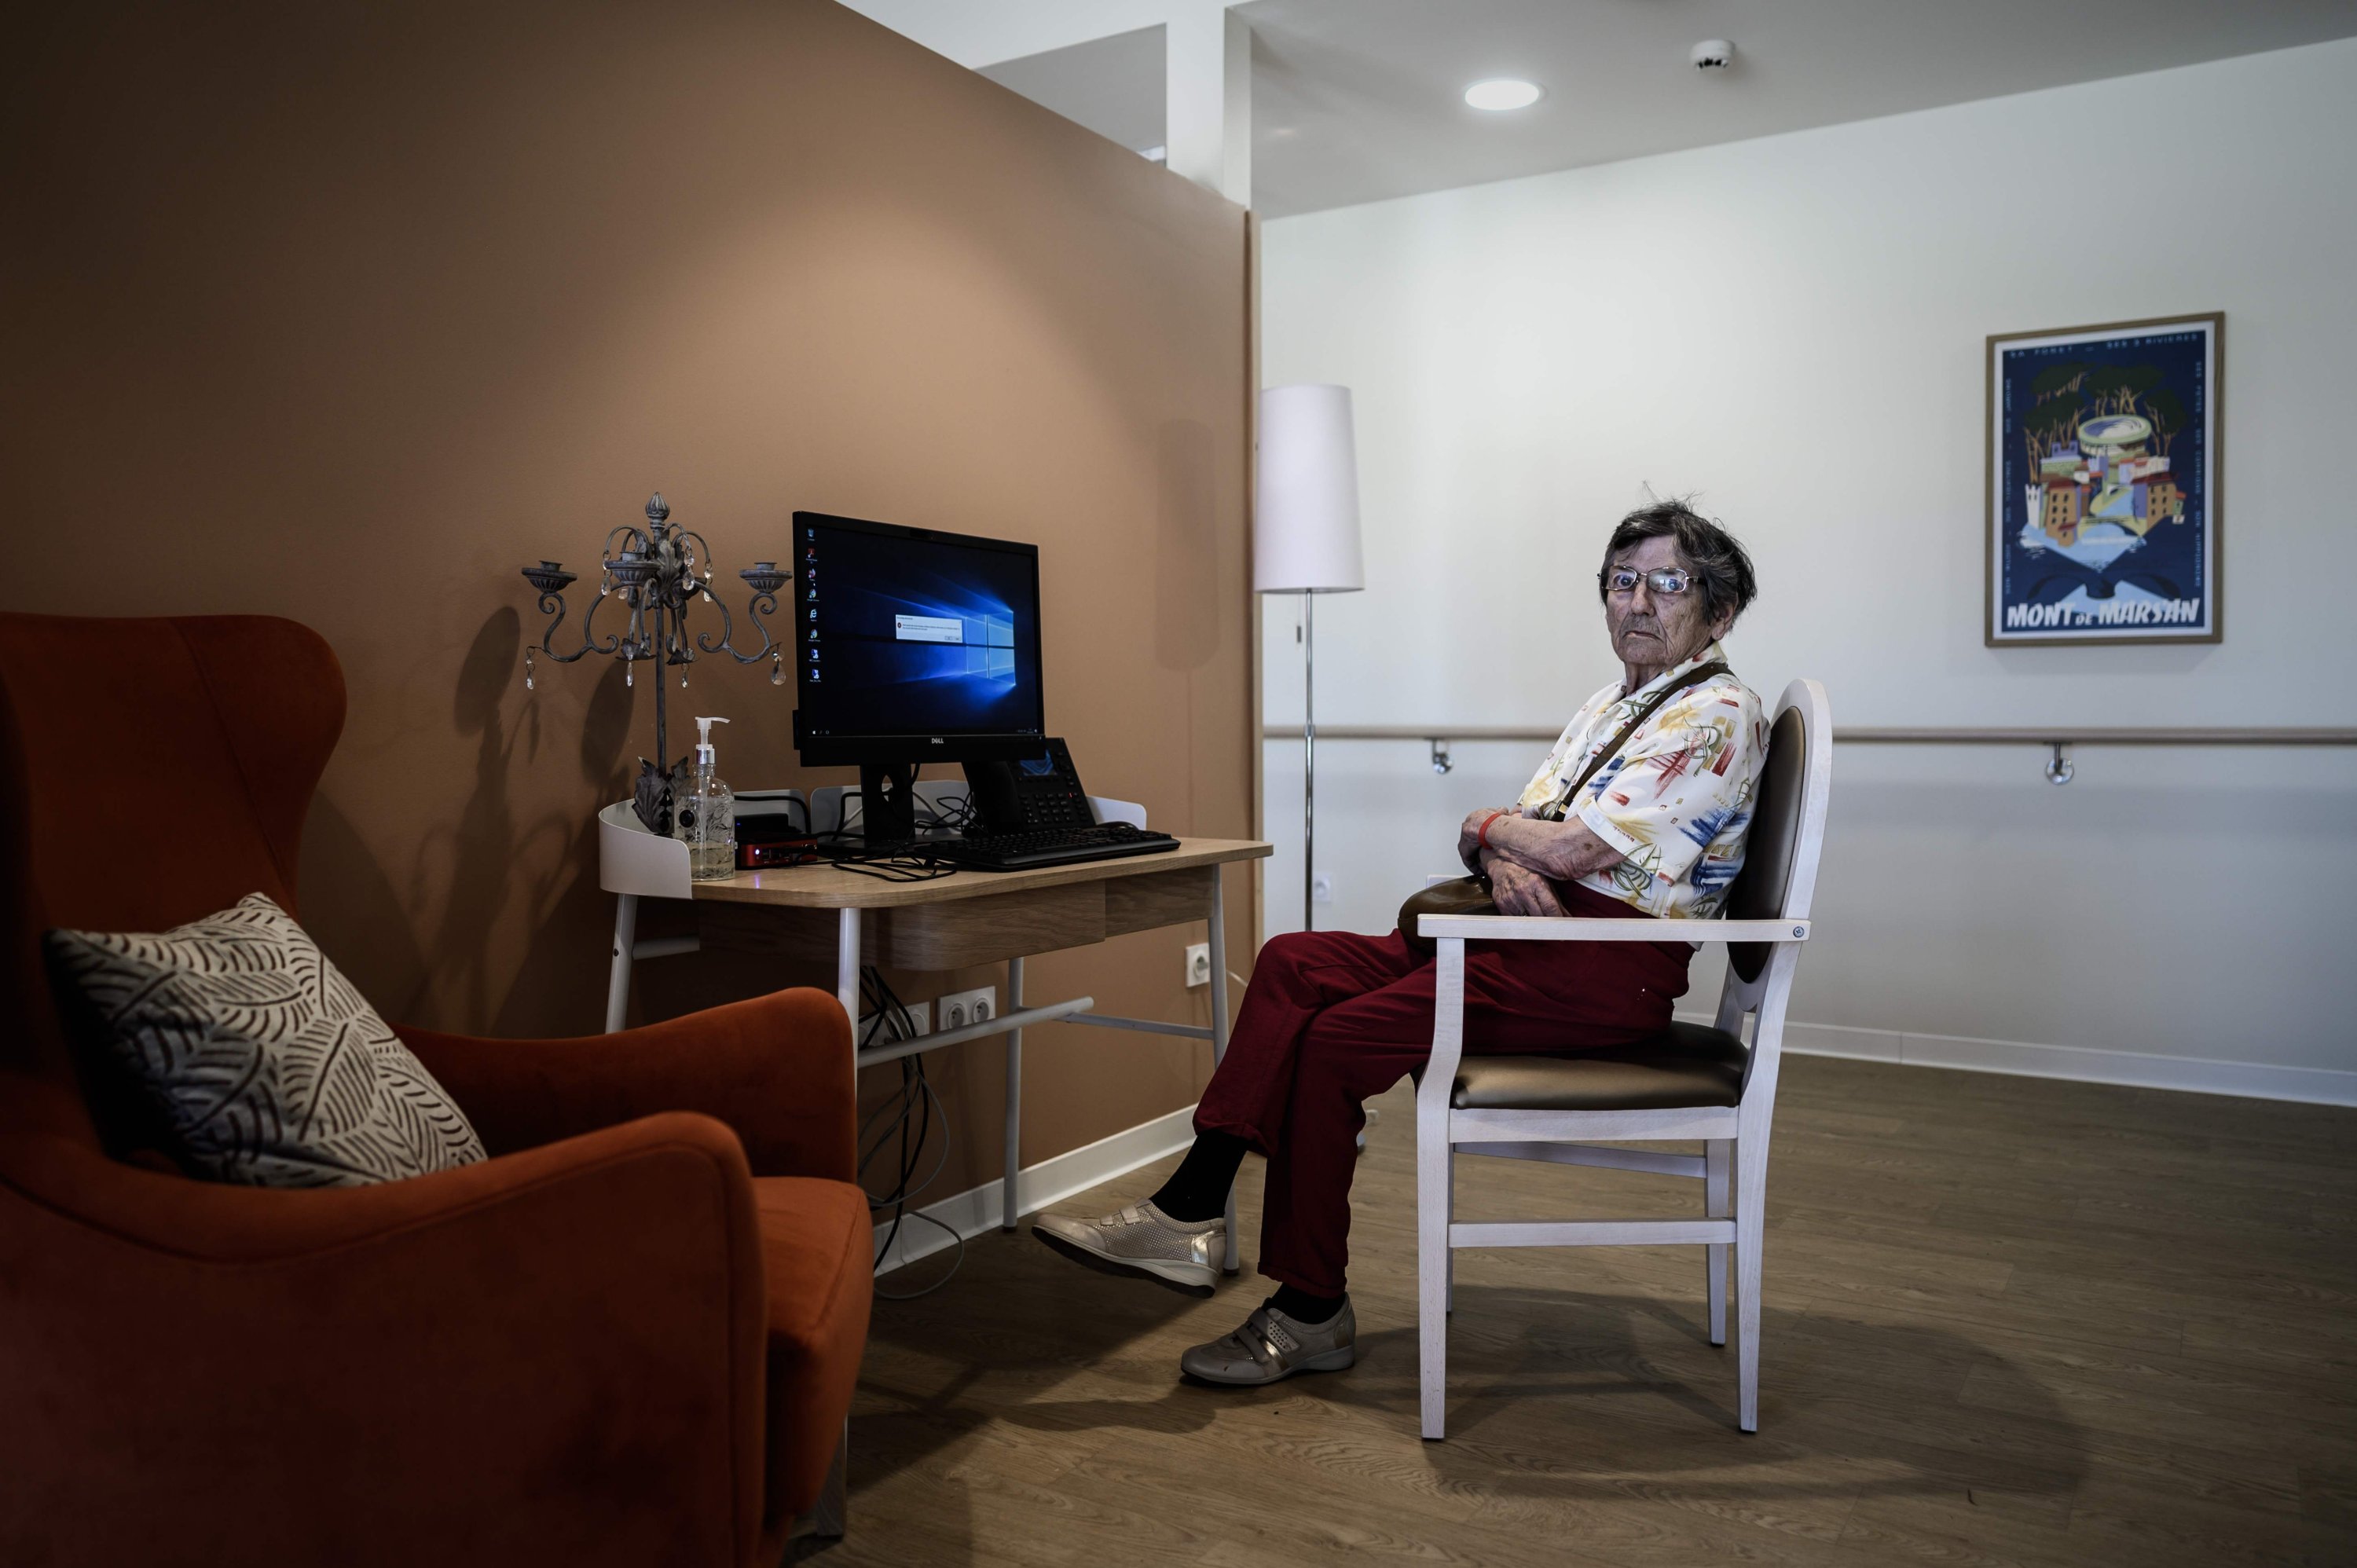 An Alzheimer’s patient sits in one of the living quarters of the village Landais Alzheimer site for Alzheimer’s patients in Dax, southwestern France, Sept. 9, 2020. (AFP Photo)